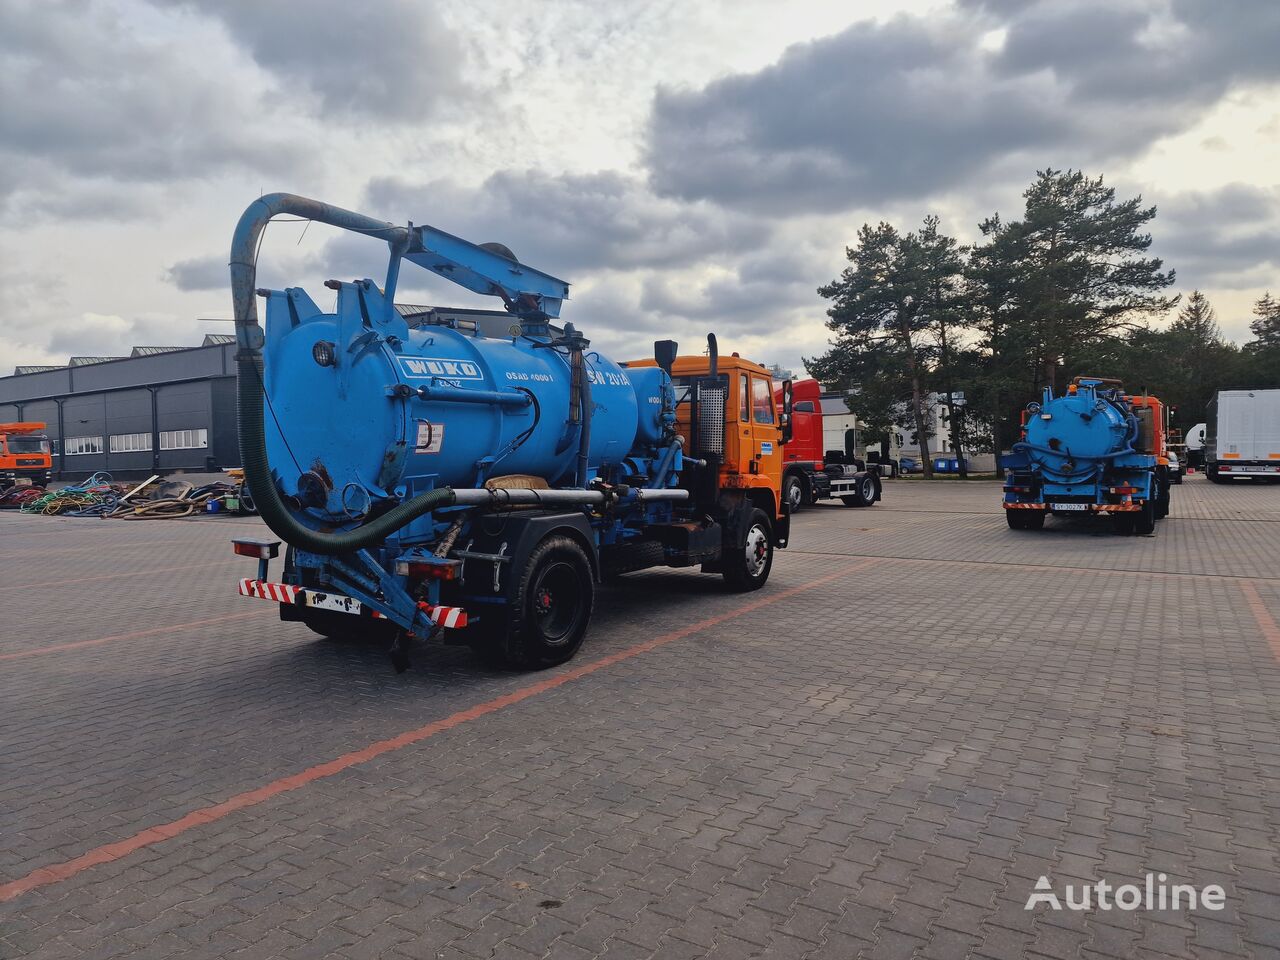 Star WUKO SWS-201A COMBI FOR DUCT CLEANING  kolkenzuiger